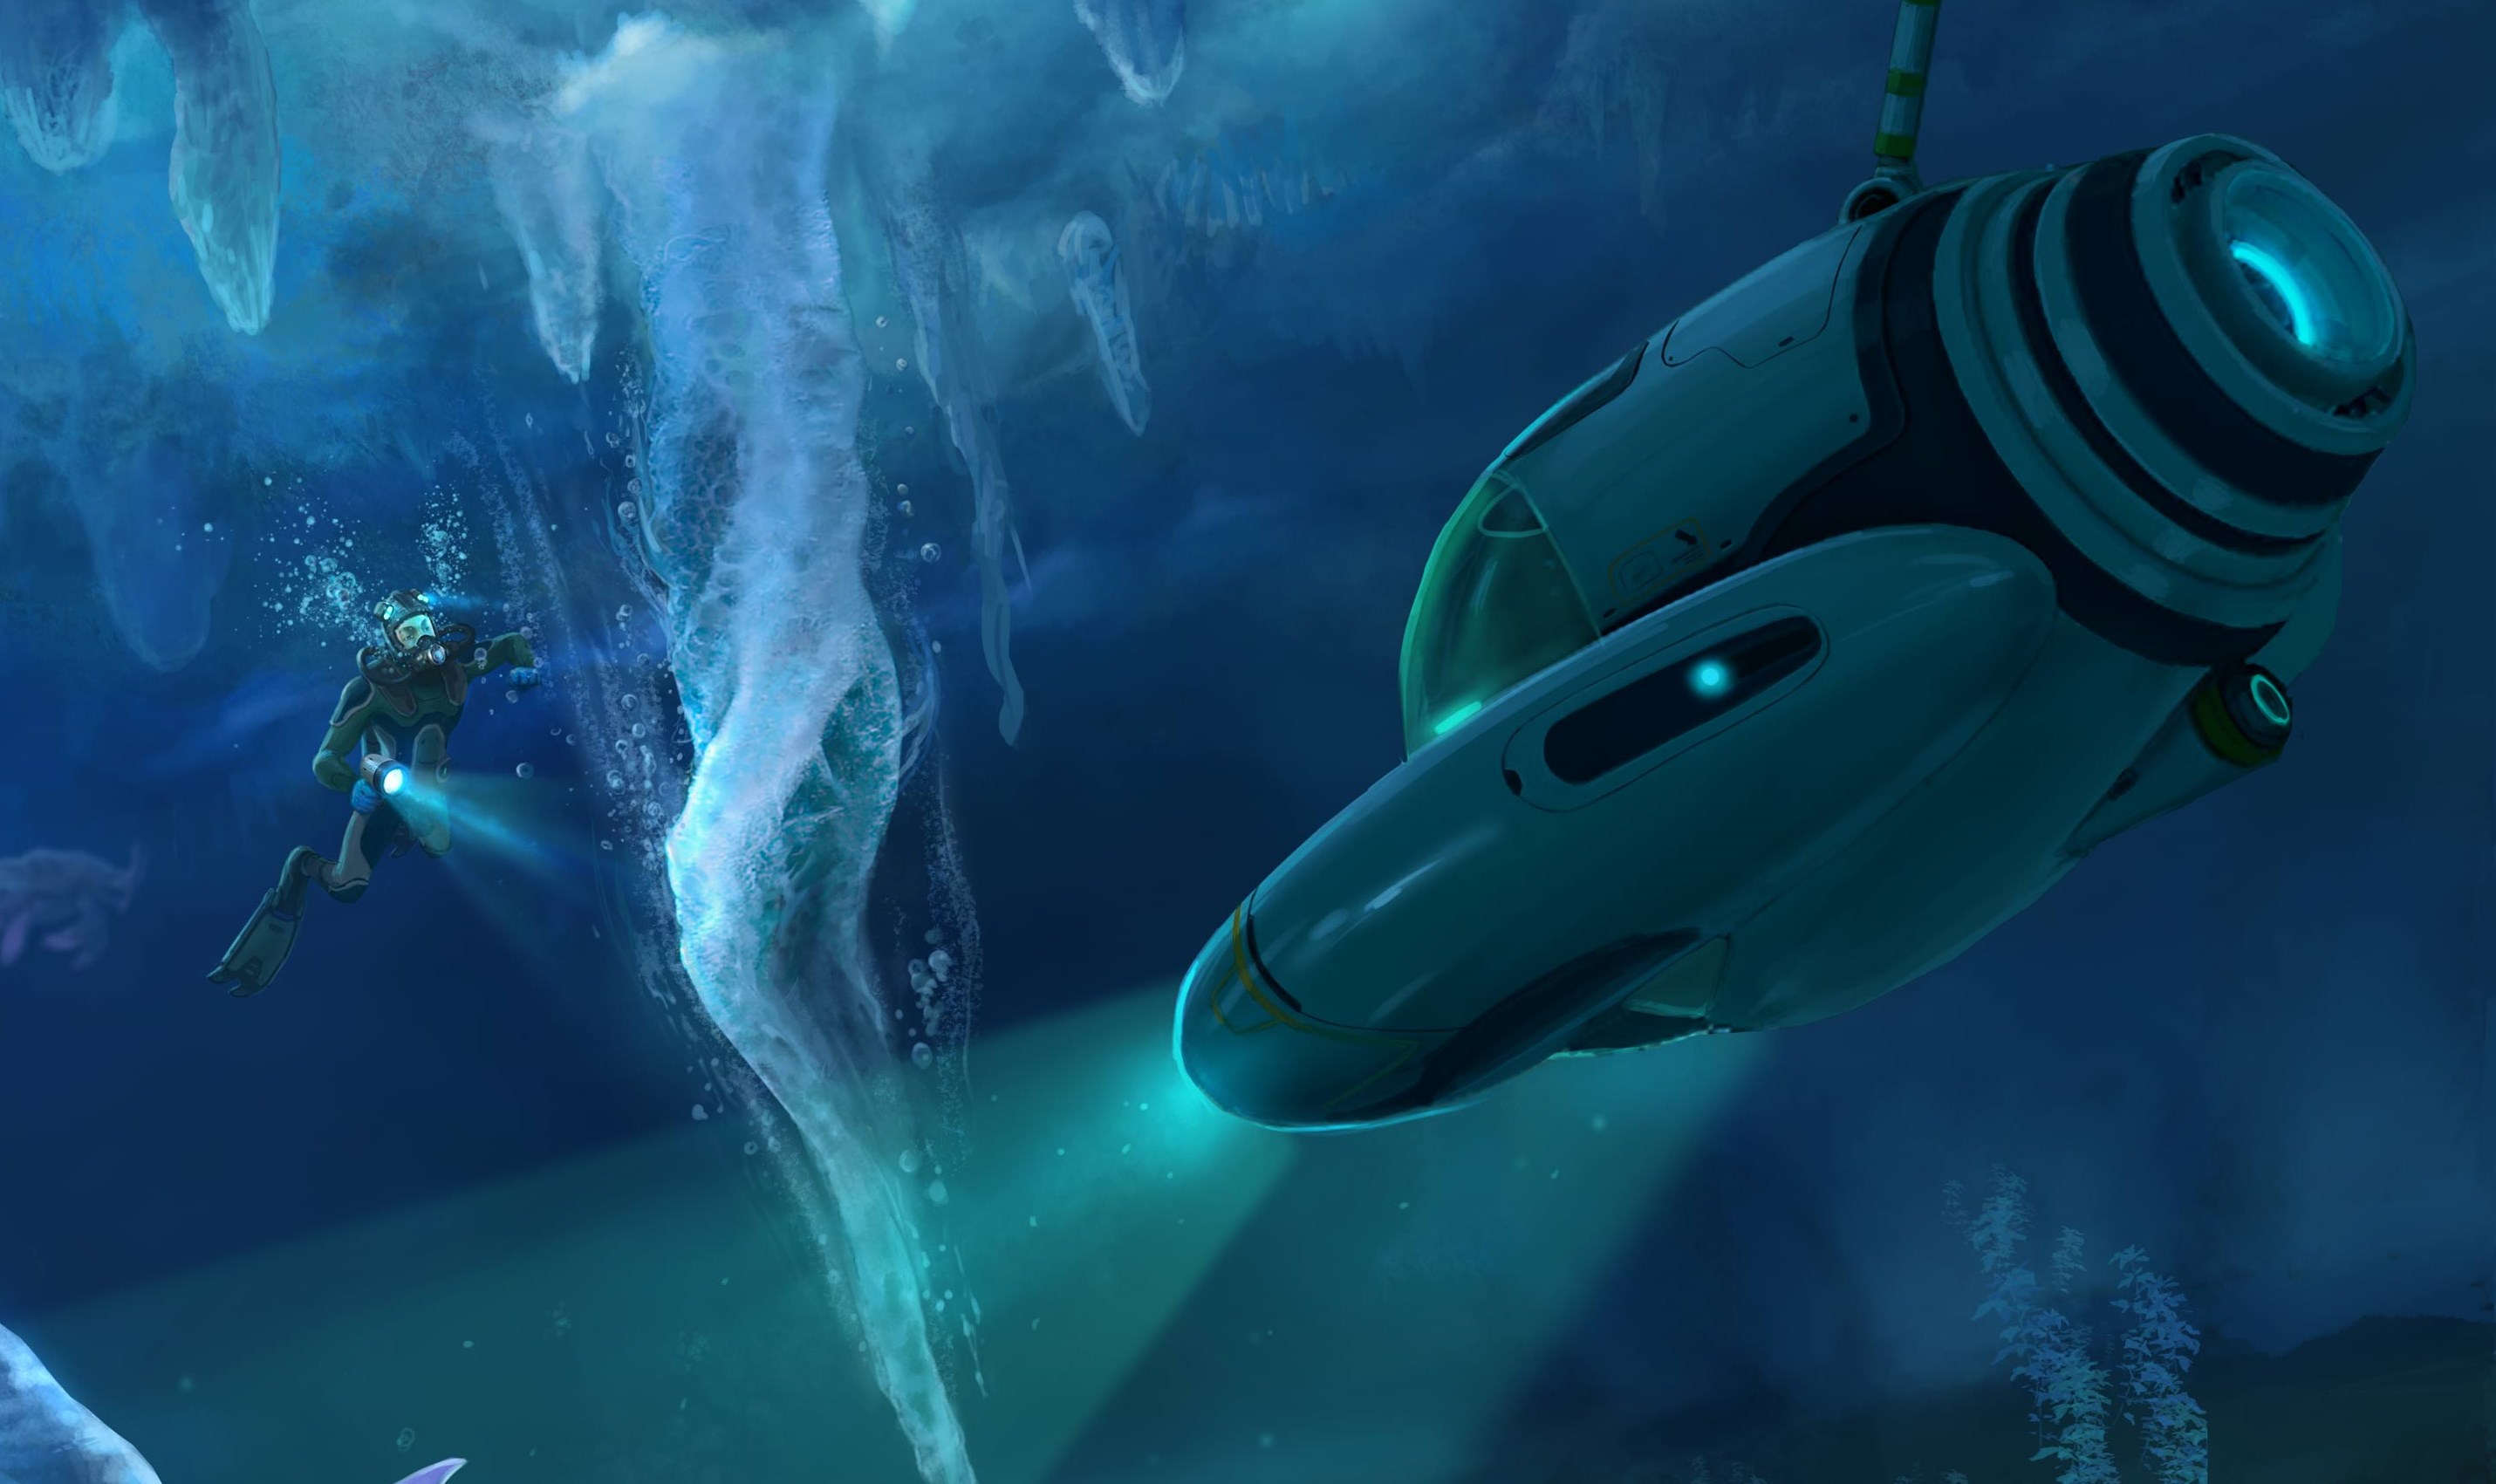 Subnautica: Below Zero returns to the sea for a brand-new mystery - Caffein...